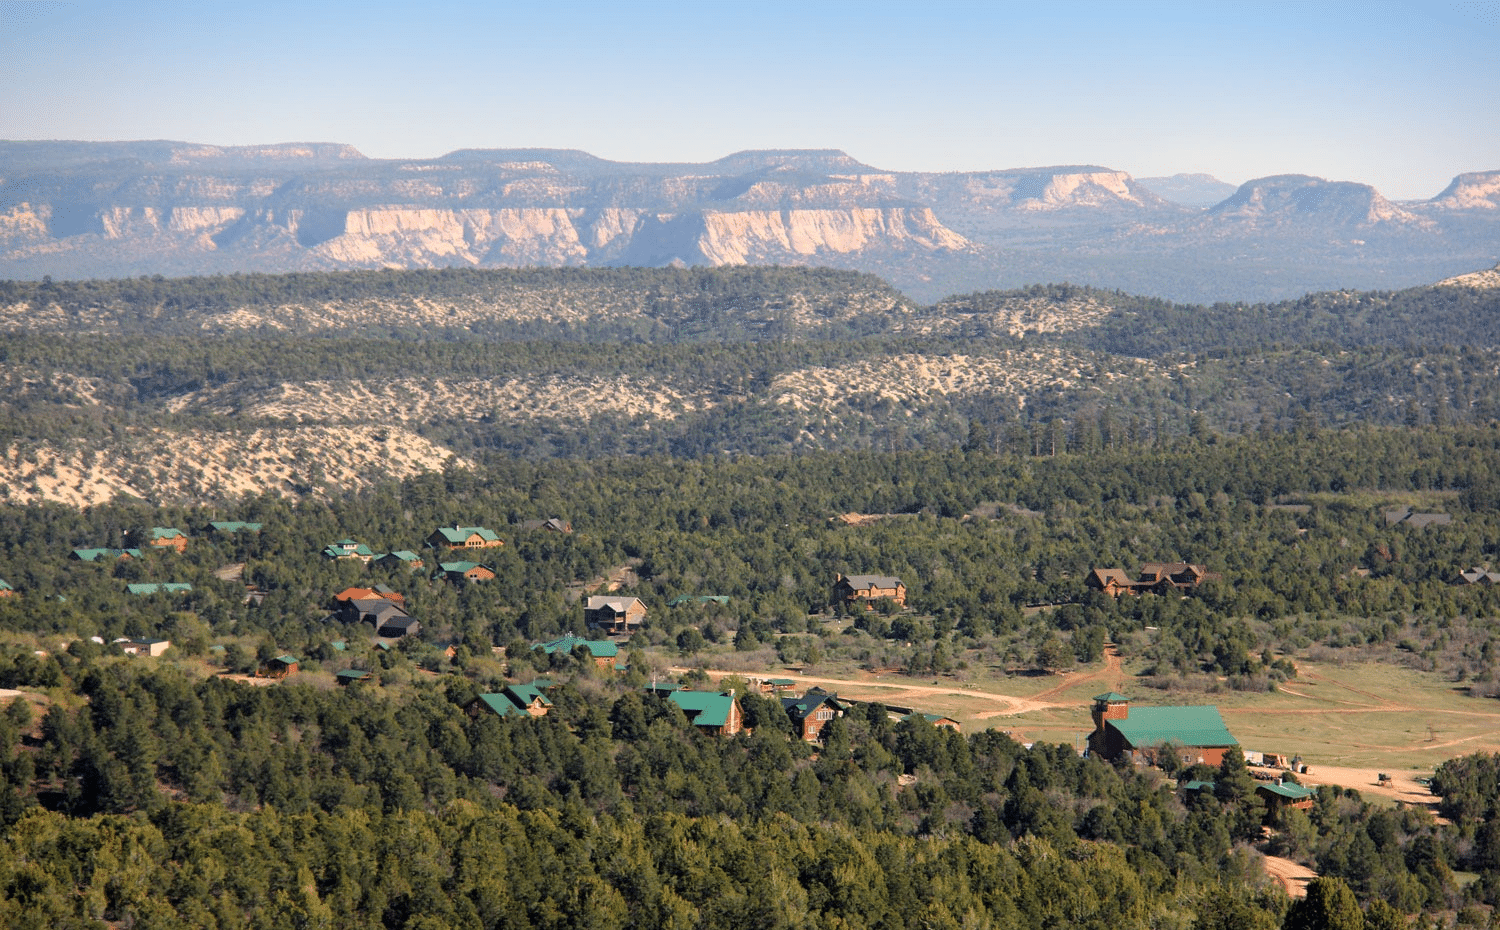 Overview of Zion Ponderosa Ranch & Resort near Zion National Park